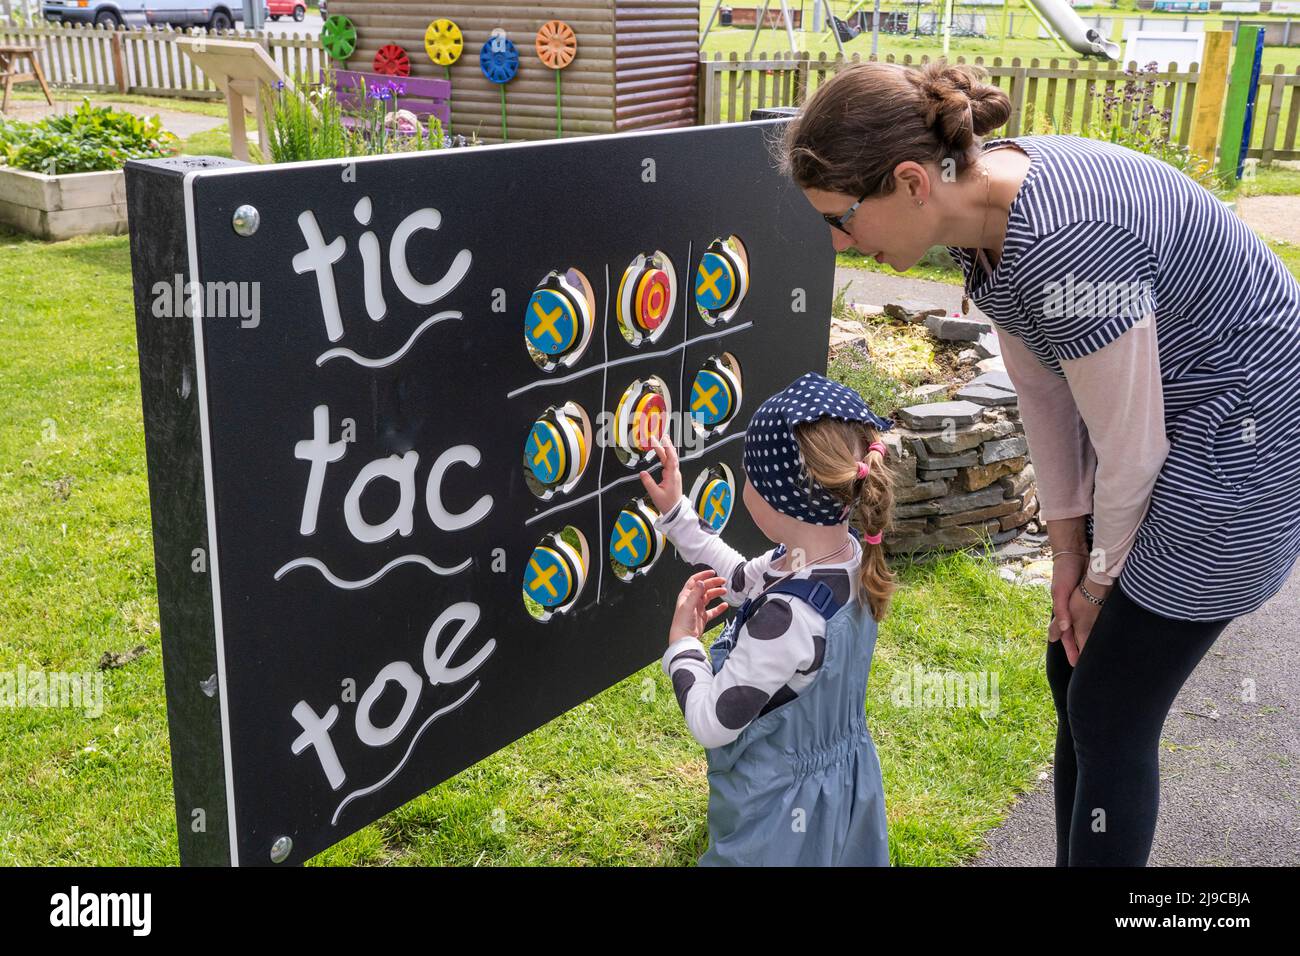 Mother teaching her daughter how to play noughts and crosses / tic tac toe on a board with spinning wheels in Kidwelly Sensory Garden, Kidwelly, Wales Stock Photo